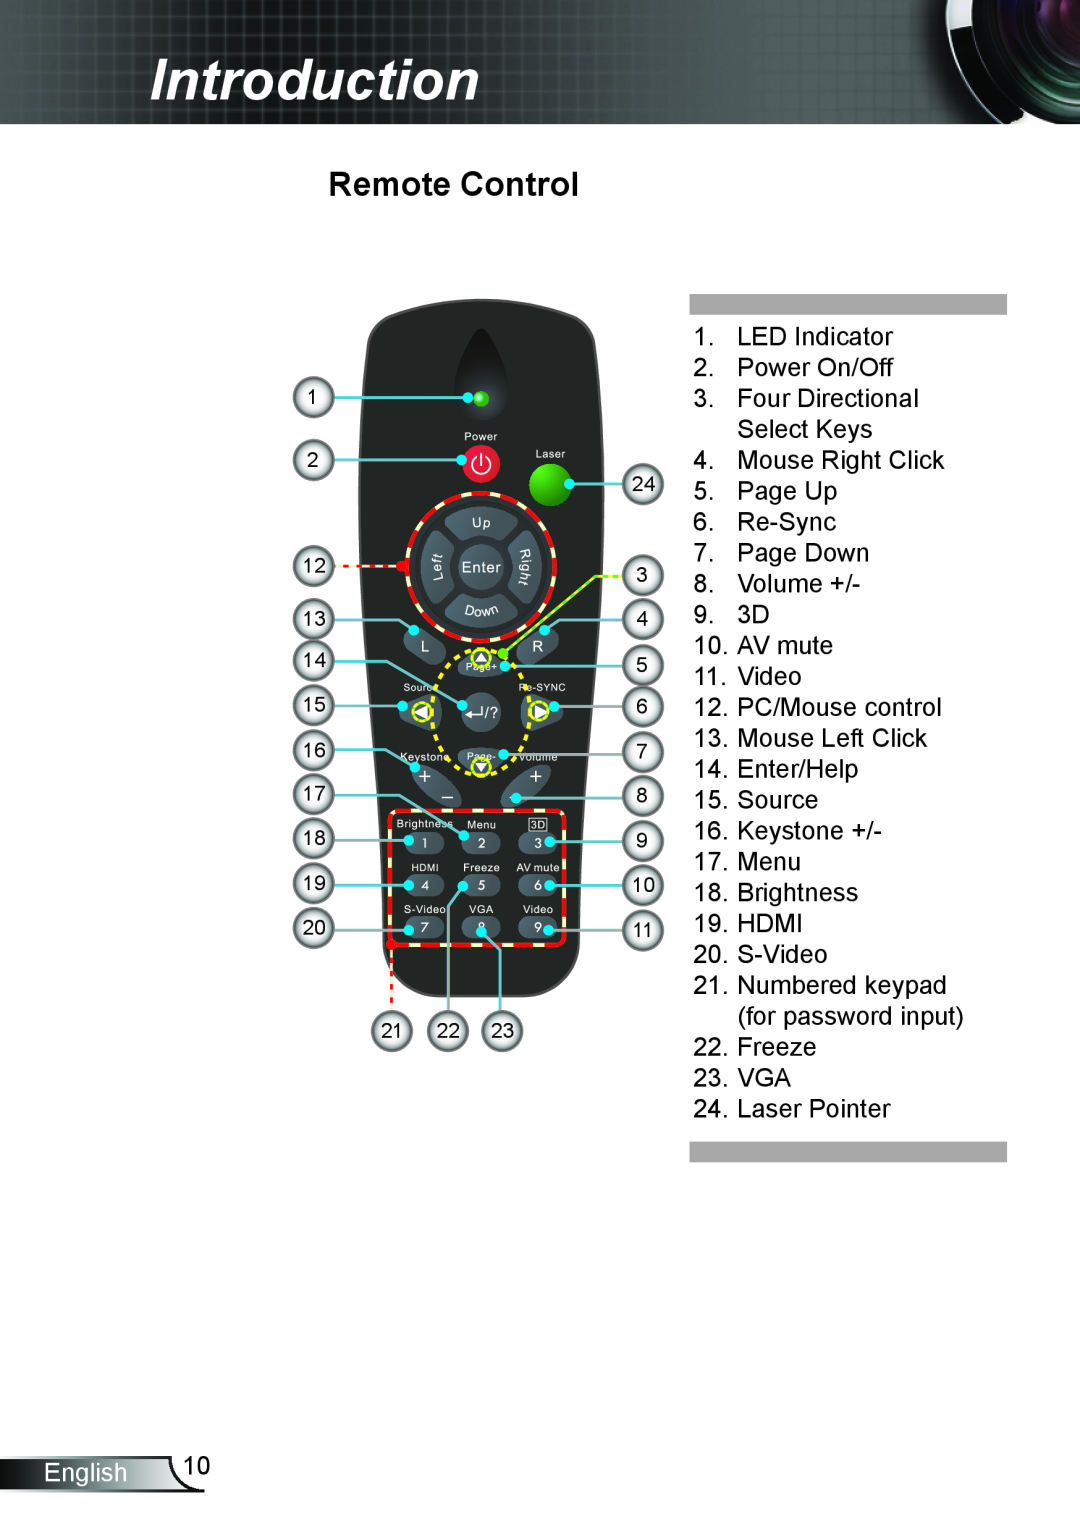 Optoma Technology TW762 manual Remote Control, Introduction, LED Indicator 2. Power On/Off 3. Four Directional Select Keys 